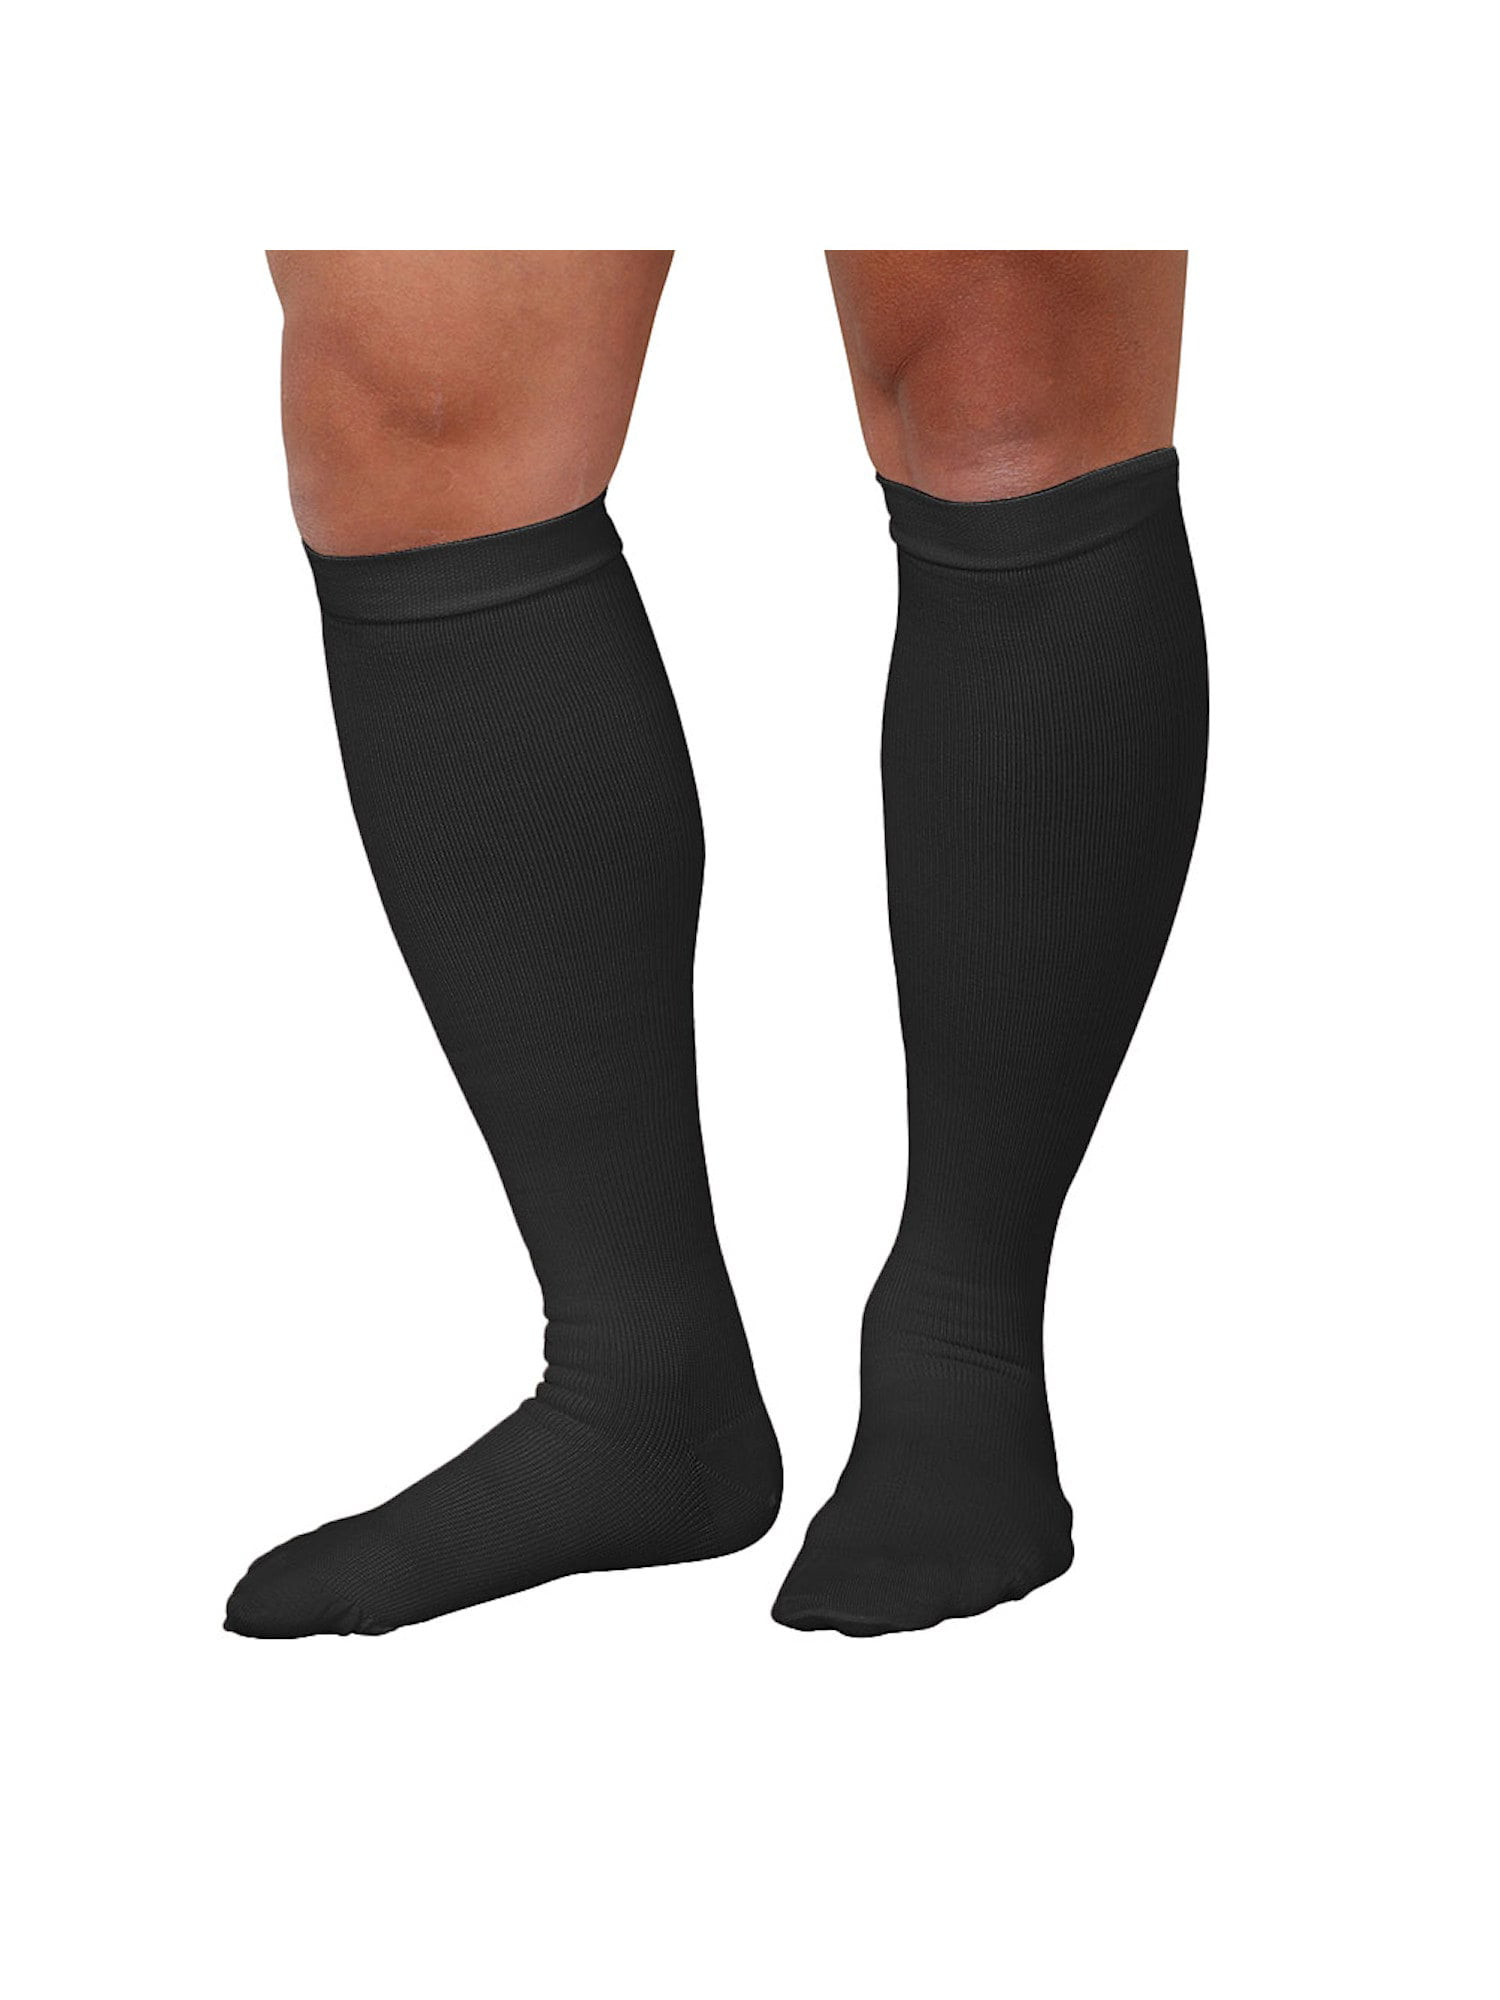 Support Plus Men's Moderate Compression Knee High Socks -15-20mmHg ...